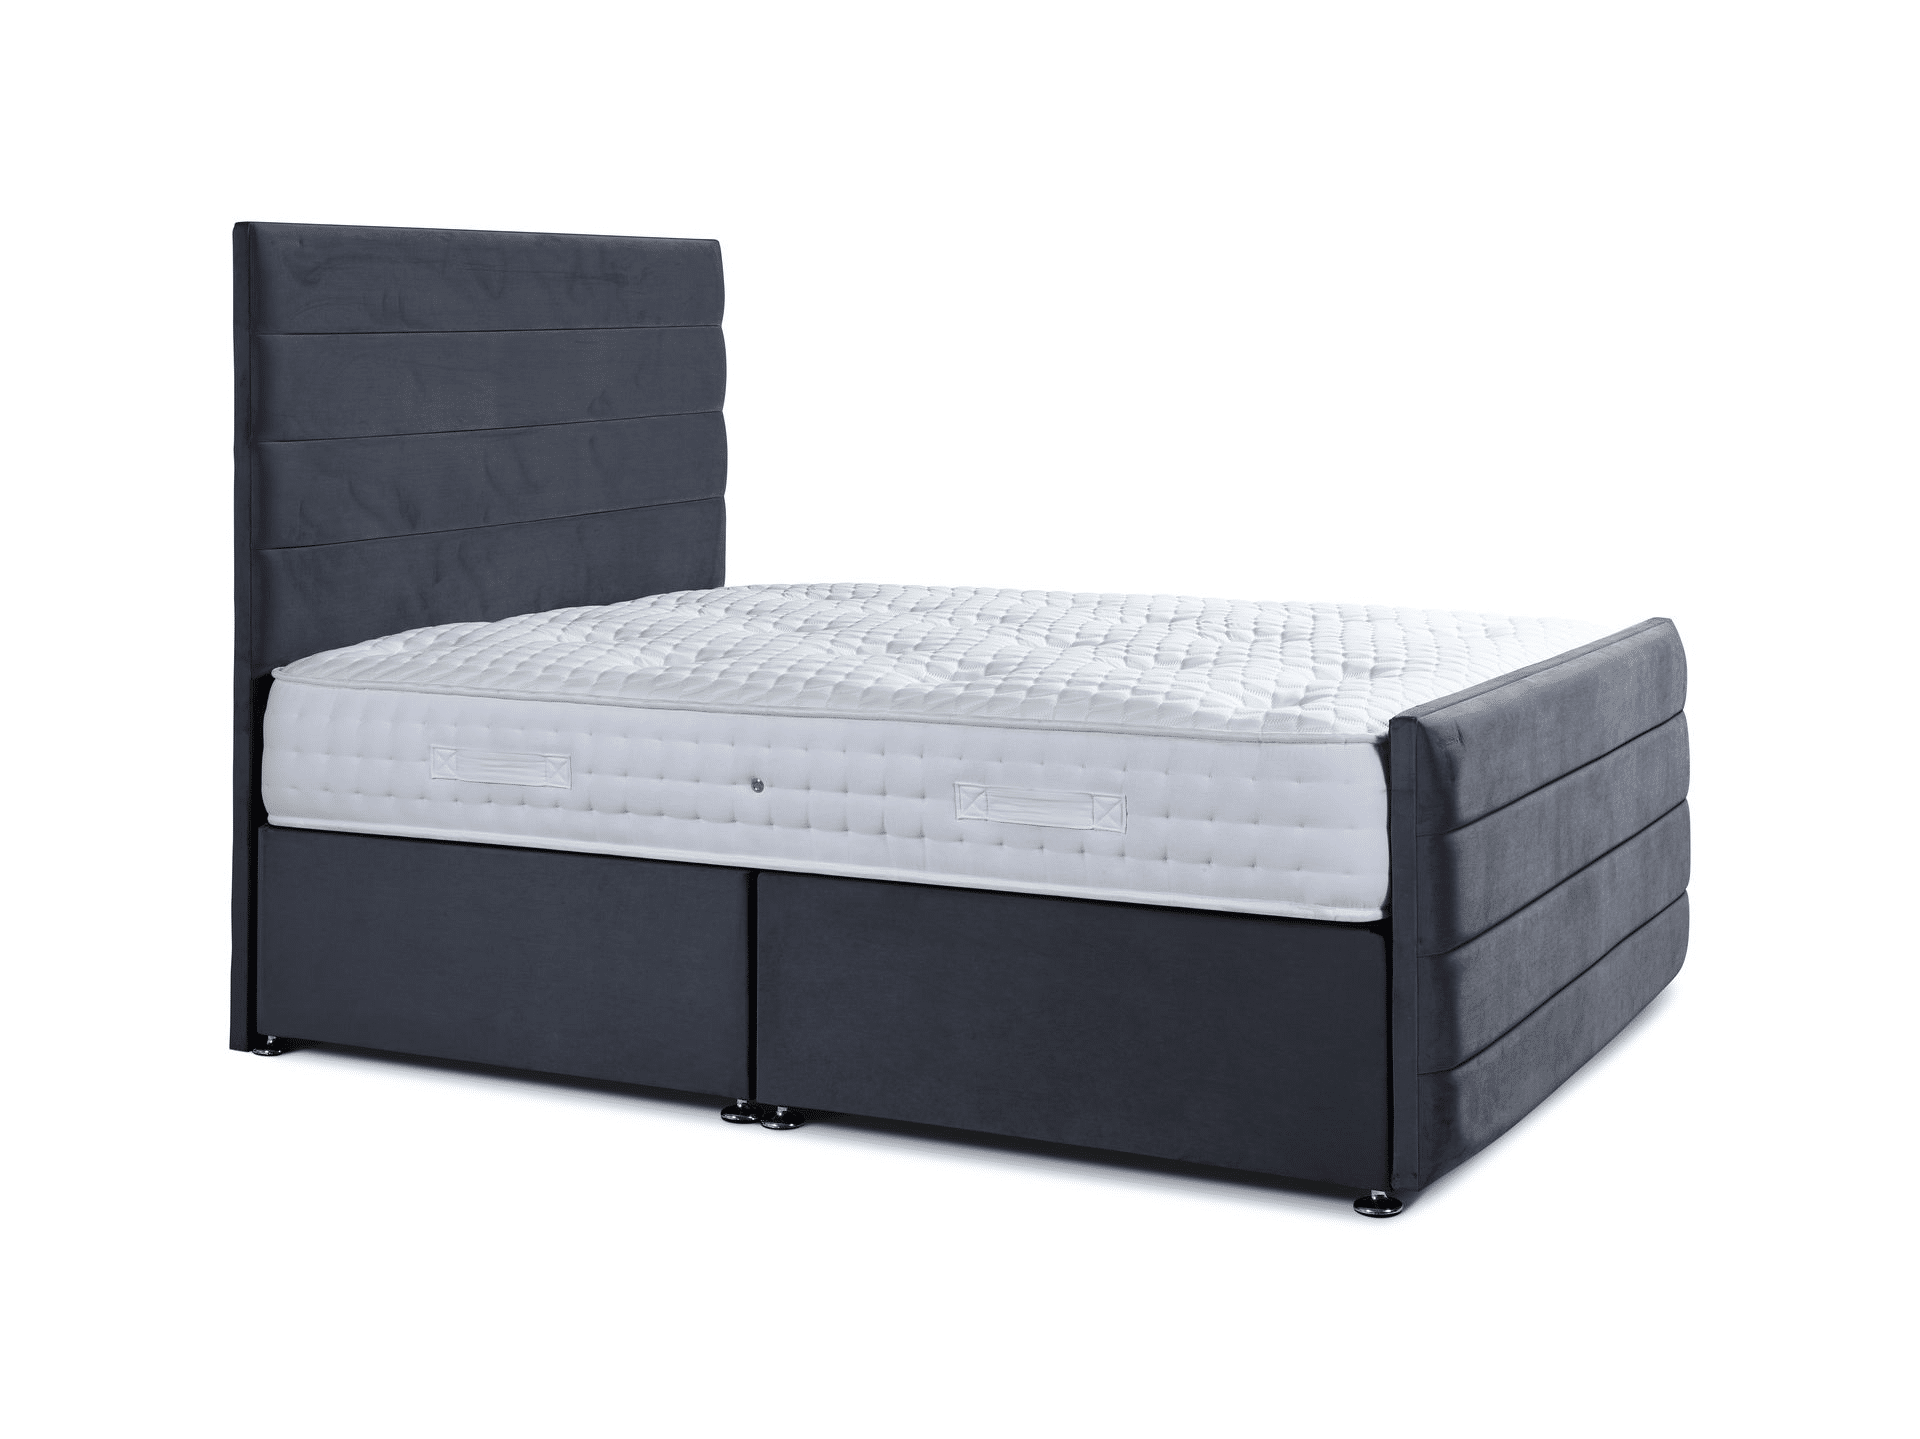 King Bedframe with storage from Glide and Slide